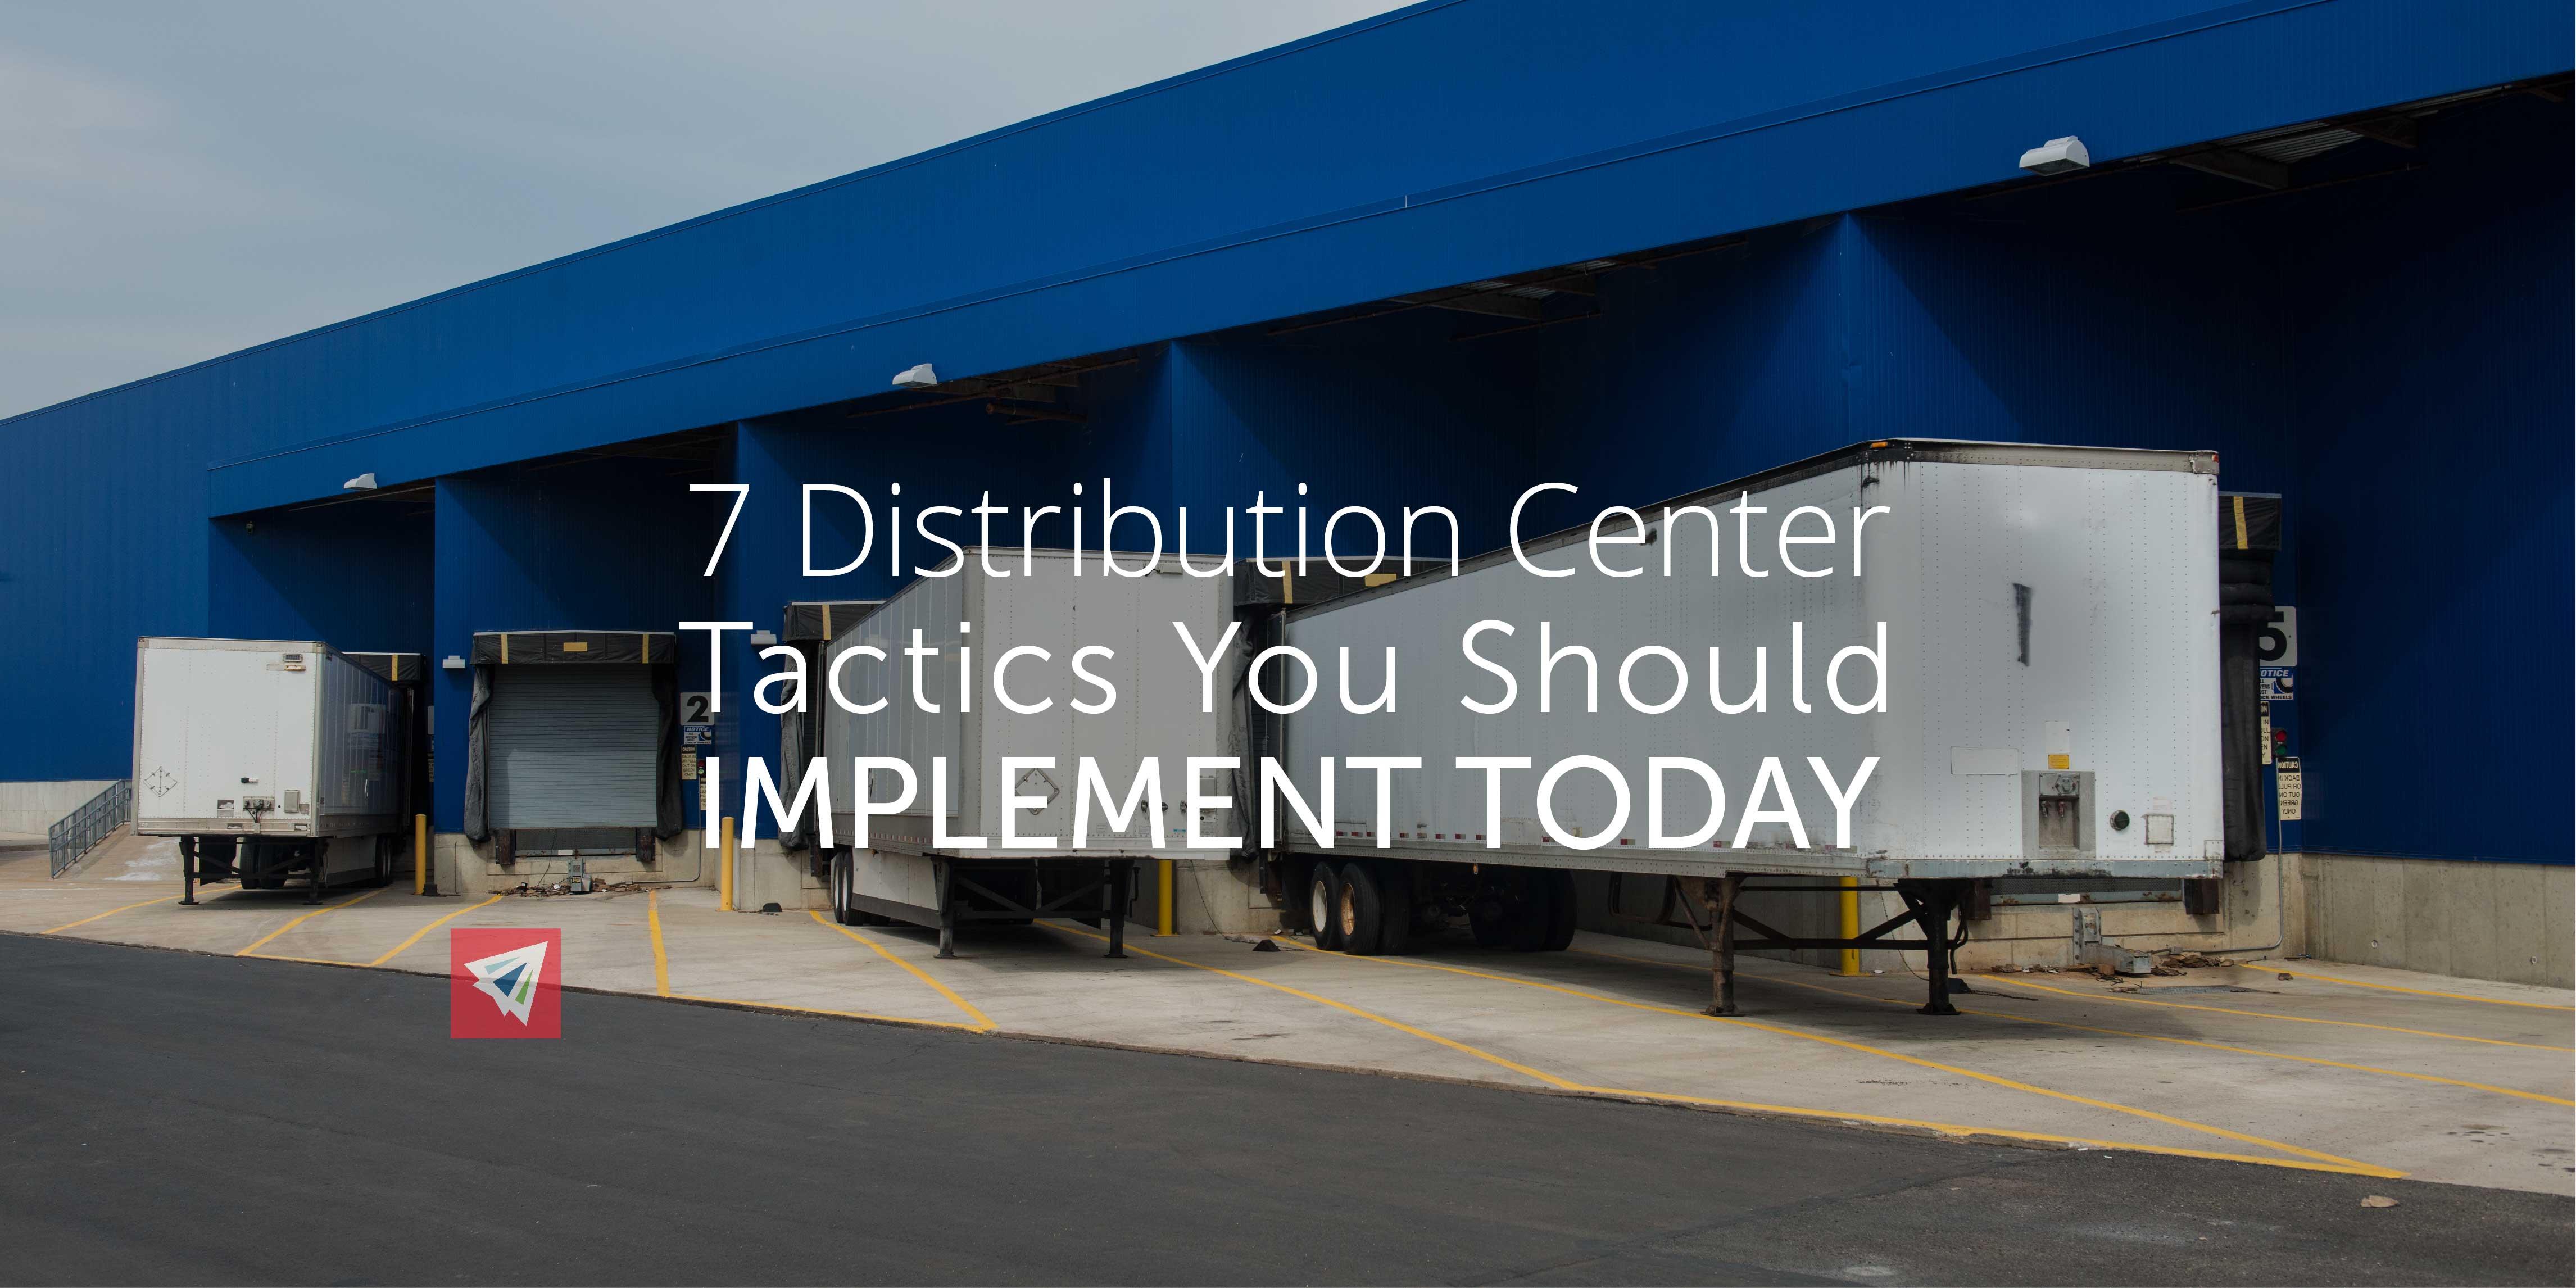 7 Distribution Center Tactics You Should Implement Today